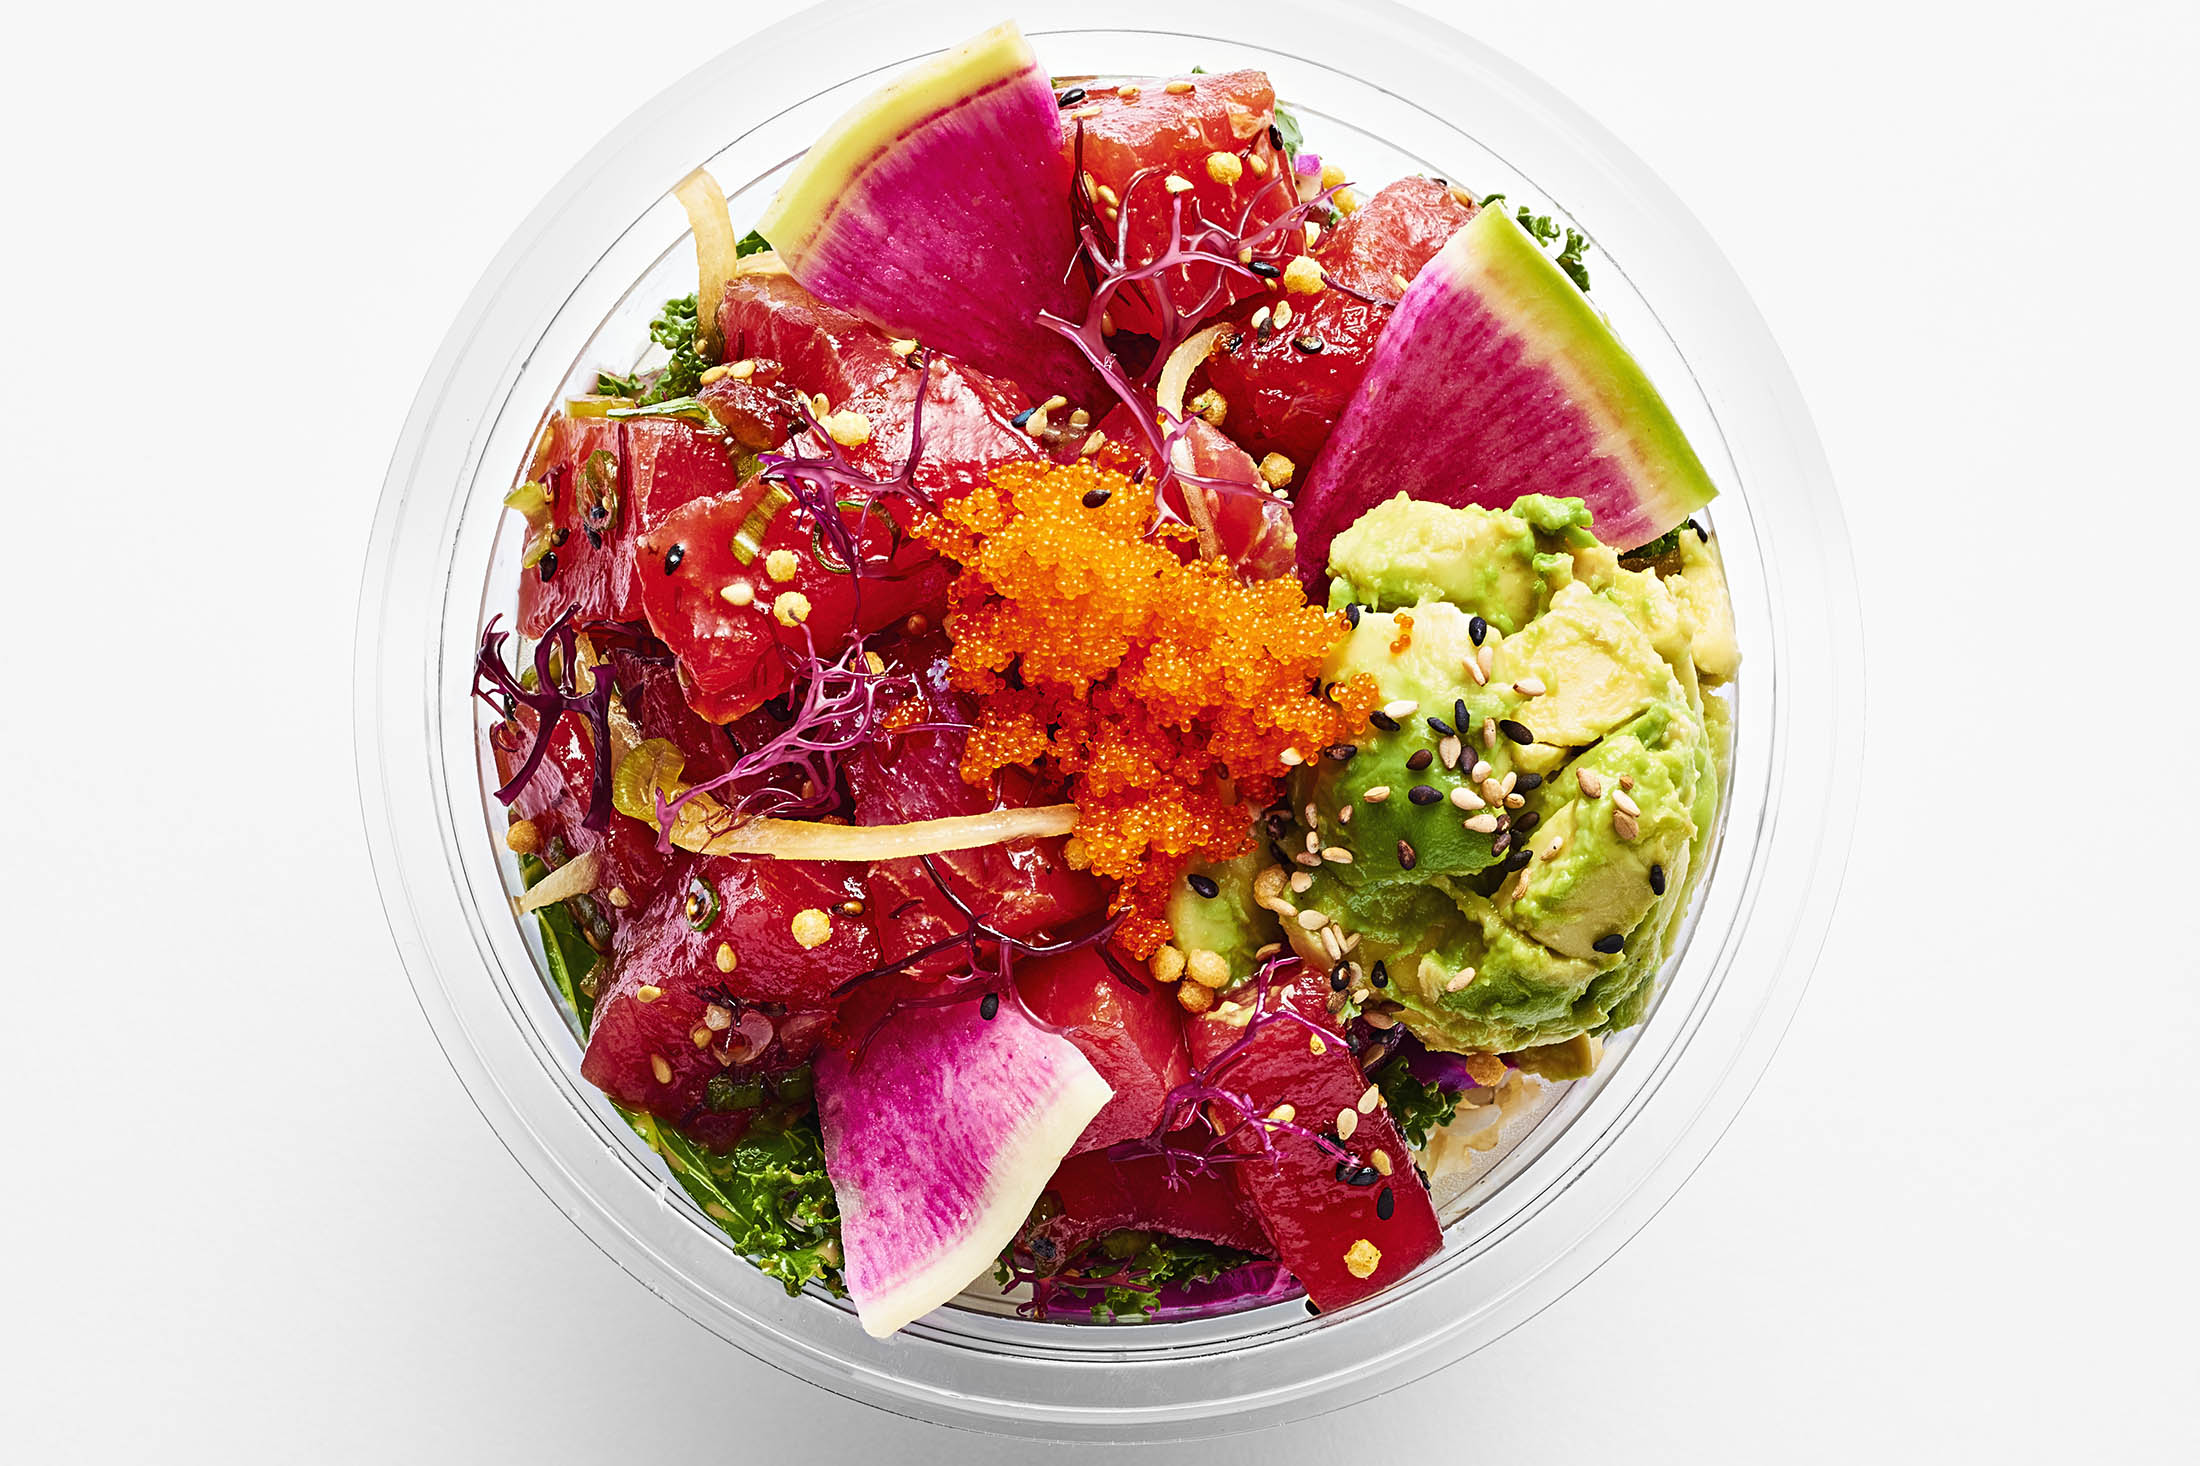 Poke Foods Industry Market Report Opportunities, and Forecast By 2033